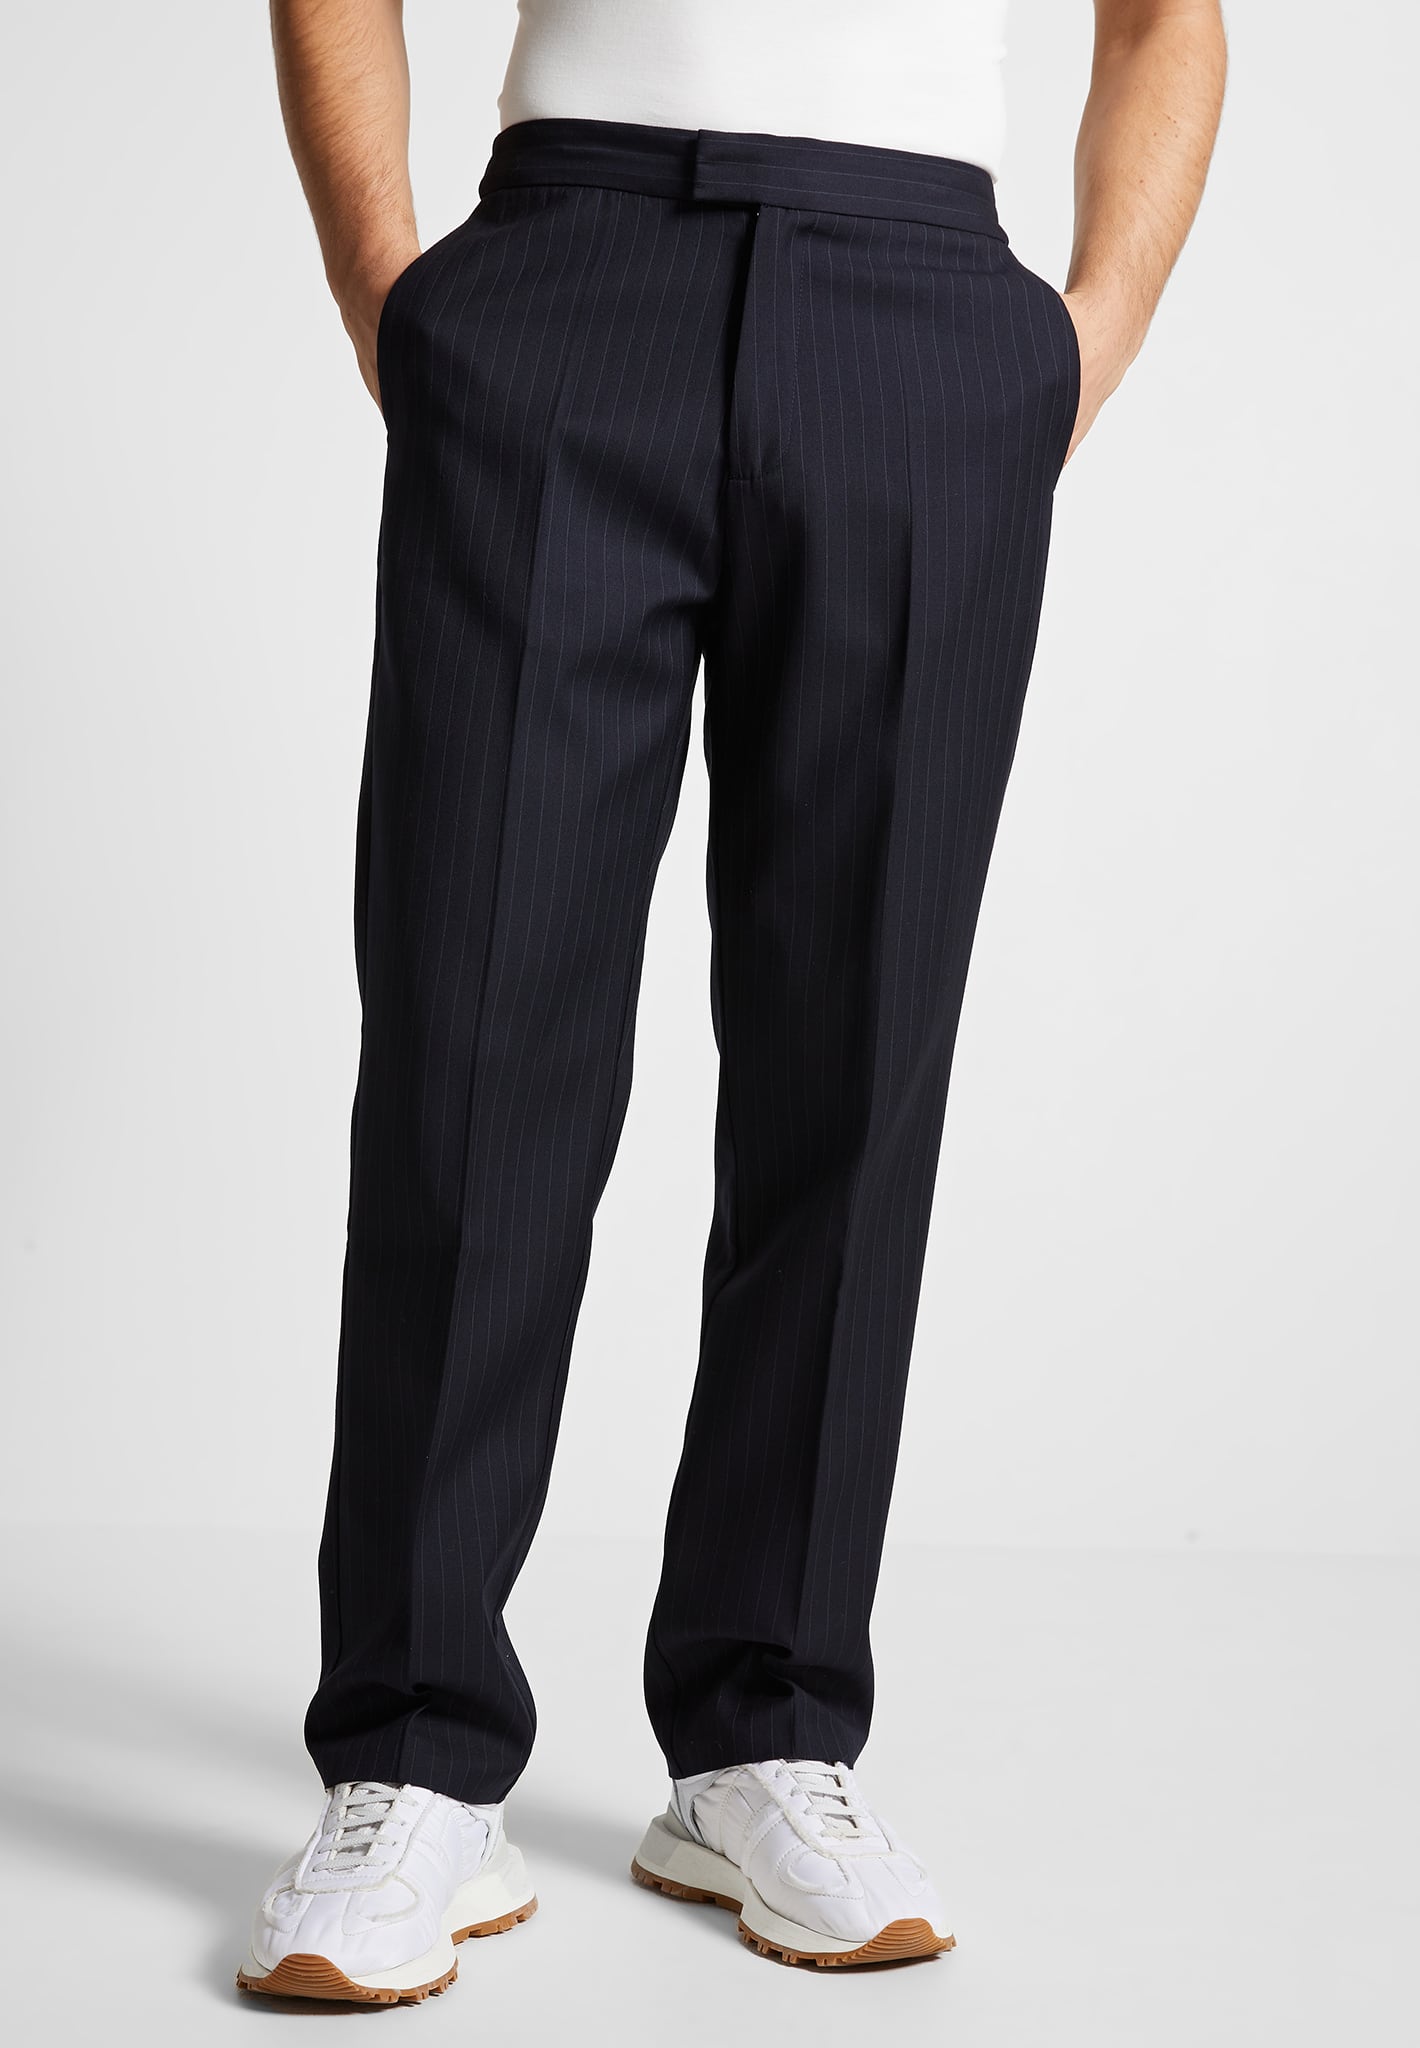 pinstripe-tailored-trousers-navy